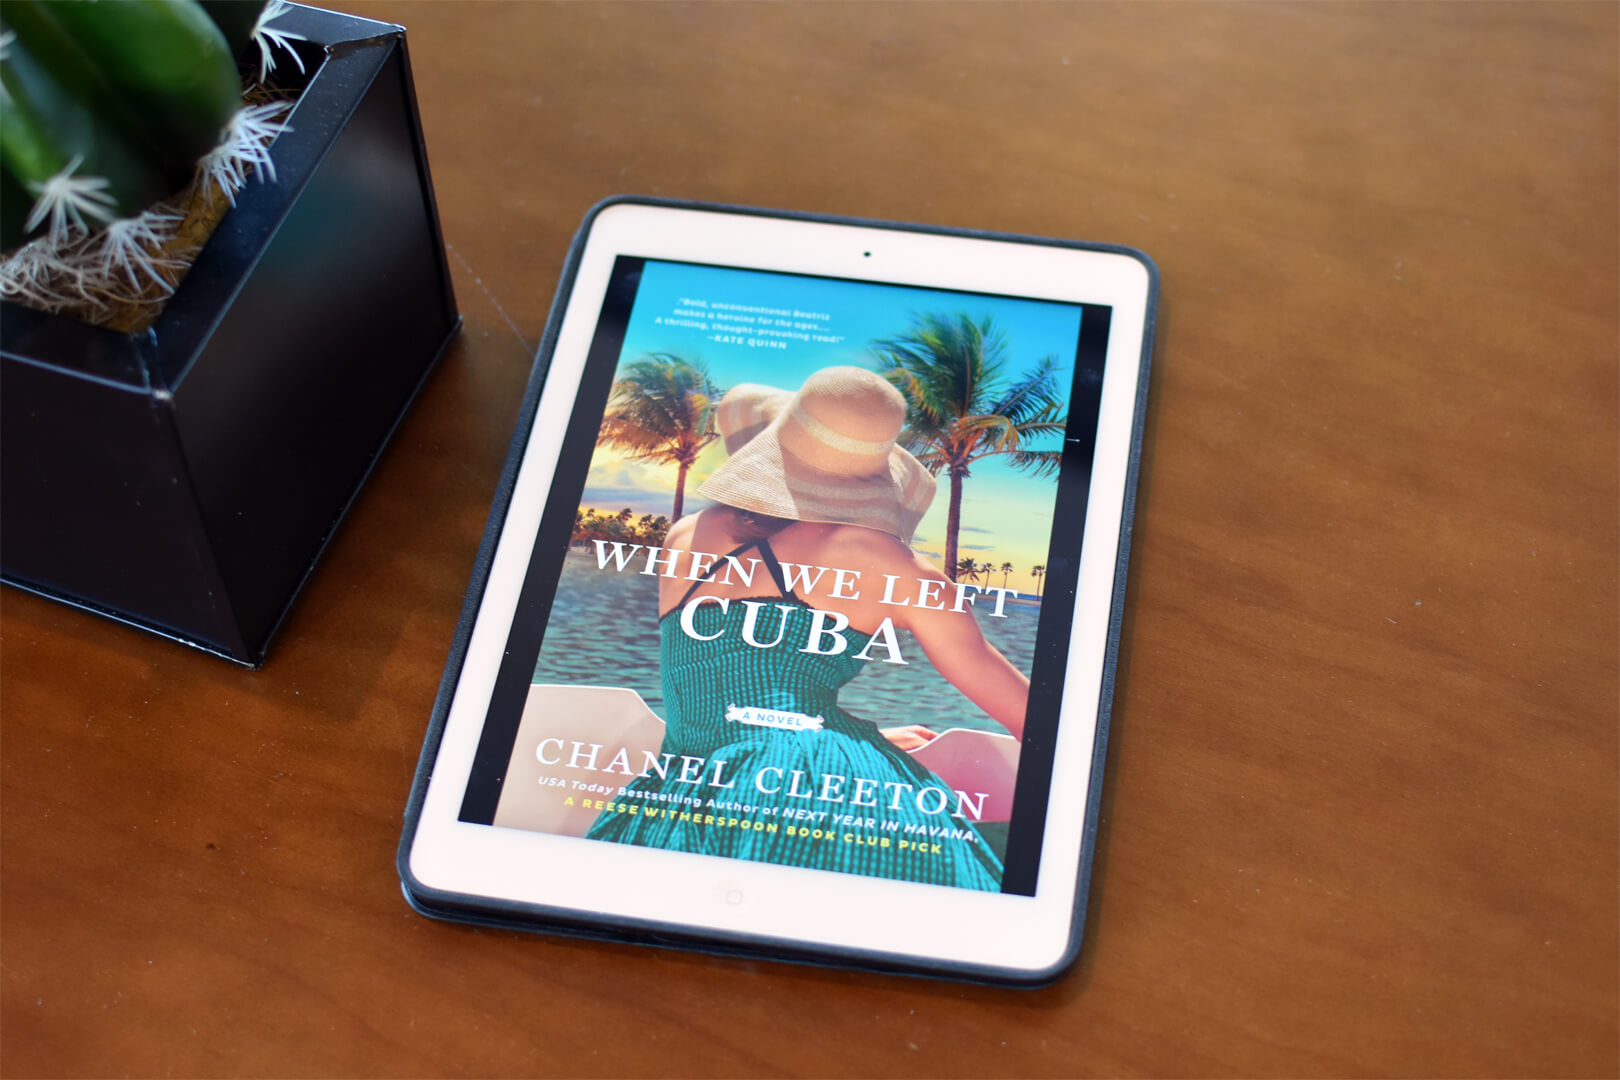 Review: When We Left Cuba by Chanel Cleeton